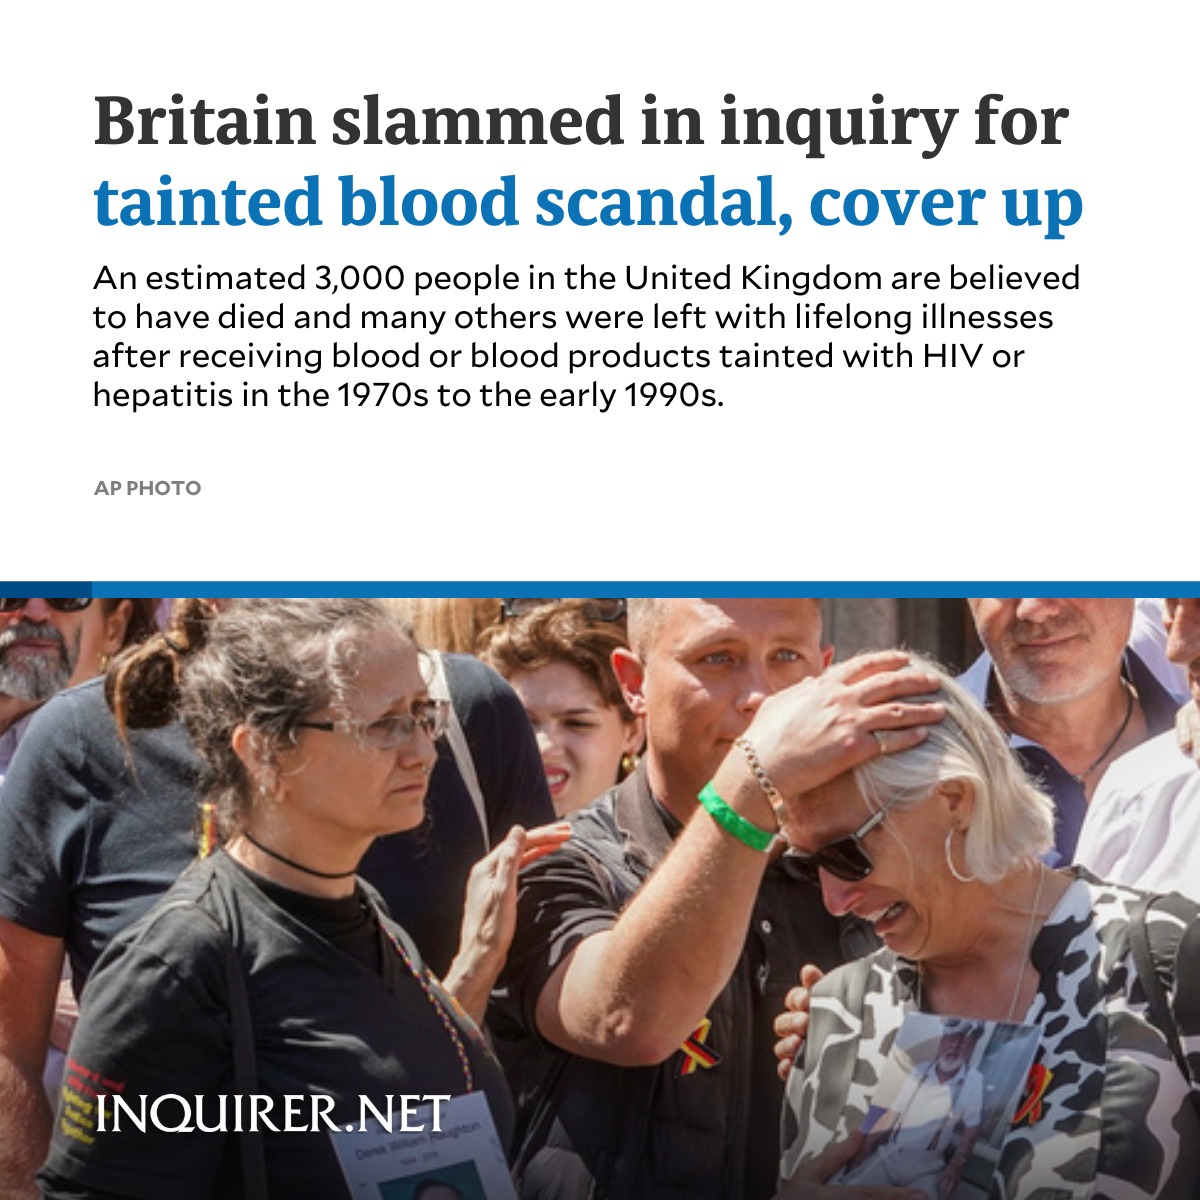 An inquiry has found that British authorities and the country’s public health service knowingly exposed tens of thousands of patients to deadly infections through contaminated blood and blood products. The probe has also discovered that they hid the truth about the disaster for